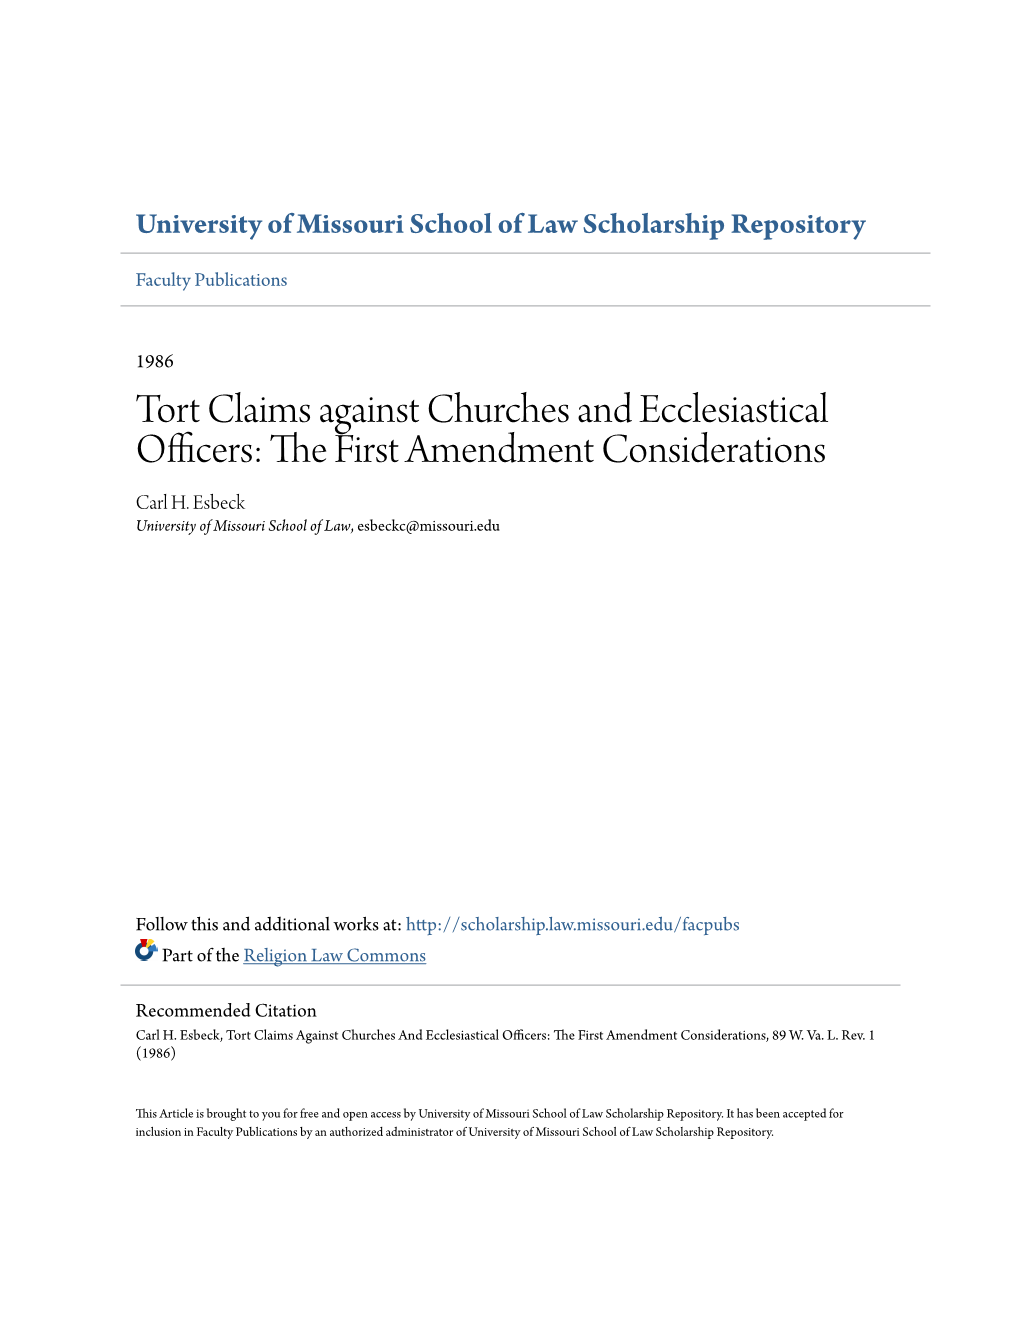 Tort Claims Against Churches and Ecclesiastical Officers: the Irsf T Amendment Considerations Carl H